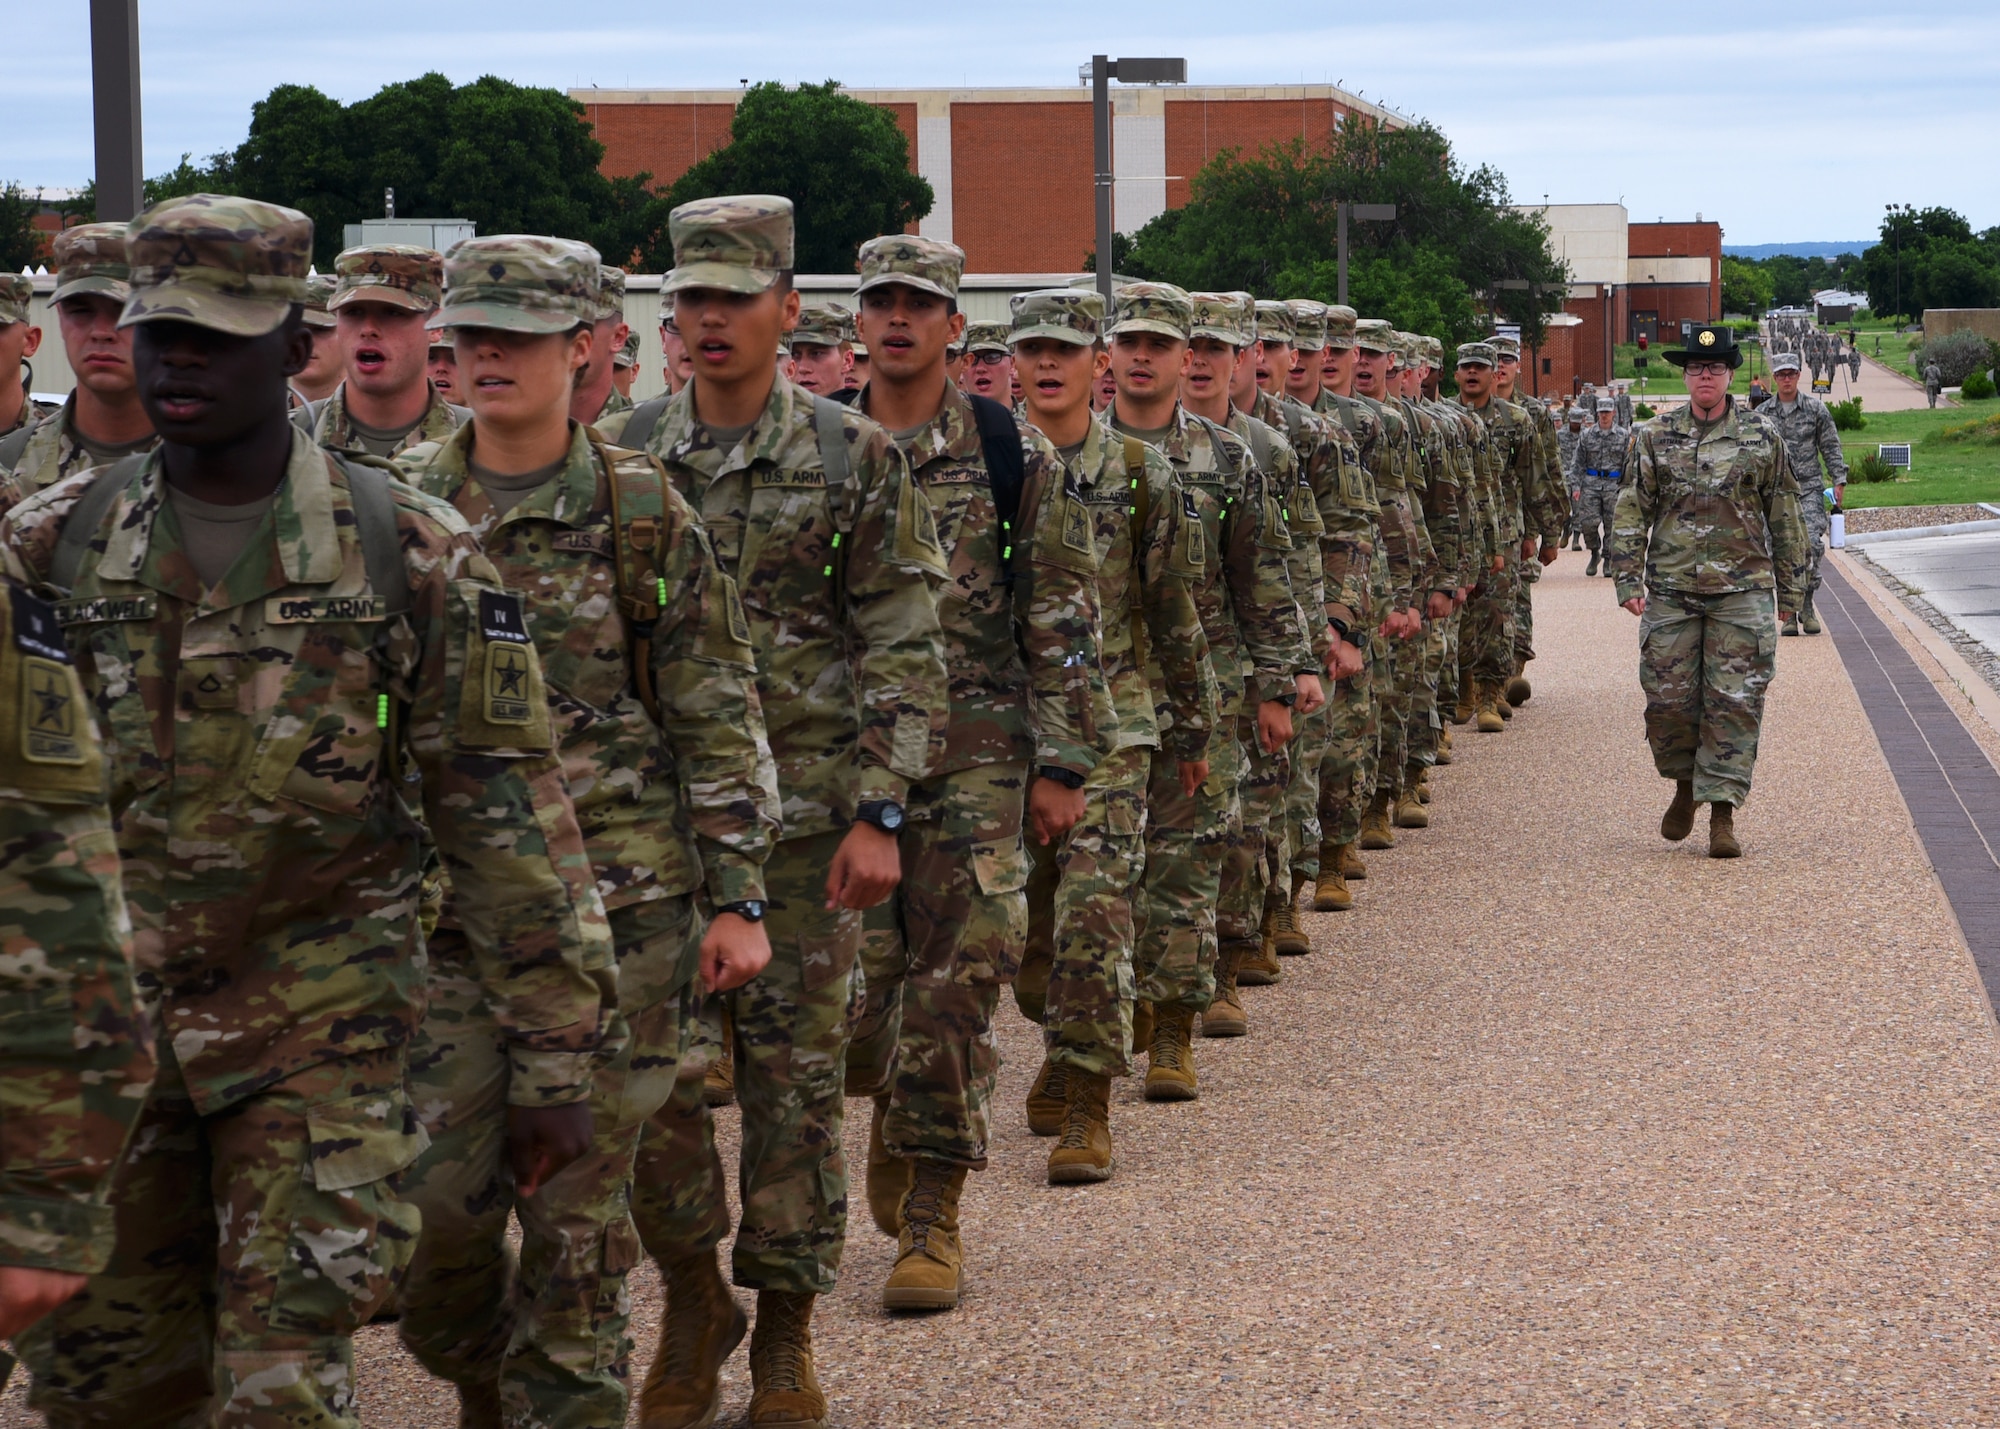 U.S. Army Staff Sgt. Sarah Artman, 344th Military Intelligence Battalion Company A drill sergeant, marches her student platoon from their signal intelligence analyst course to the Western Winds Dining Facility on Goodfellow Air Force Base, Texas, June 18, 2019. Drill sergeants develop military professionals through disciplinary techniques, such as being marched to lunch, during the Soldiers’ 24-week Advanced Individual Training on Goodfellow. (U.S. Air Force photo by Airman 1st Class Abbey Rieves/Released)